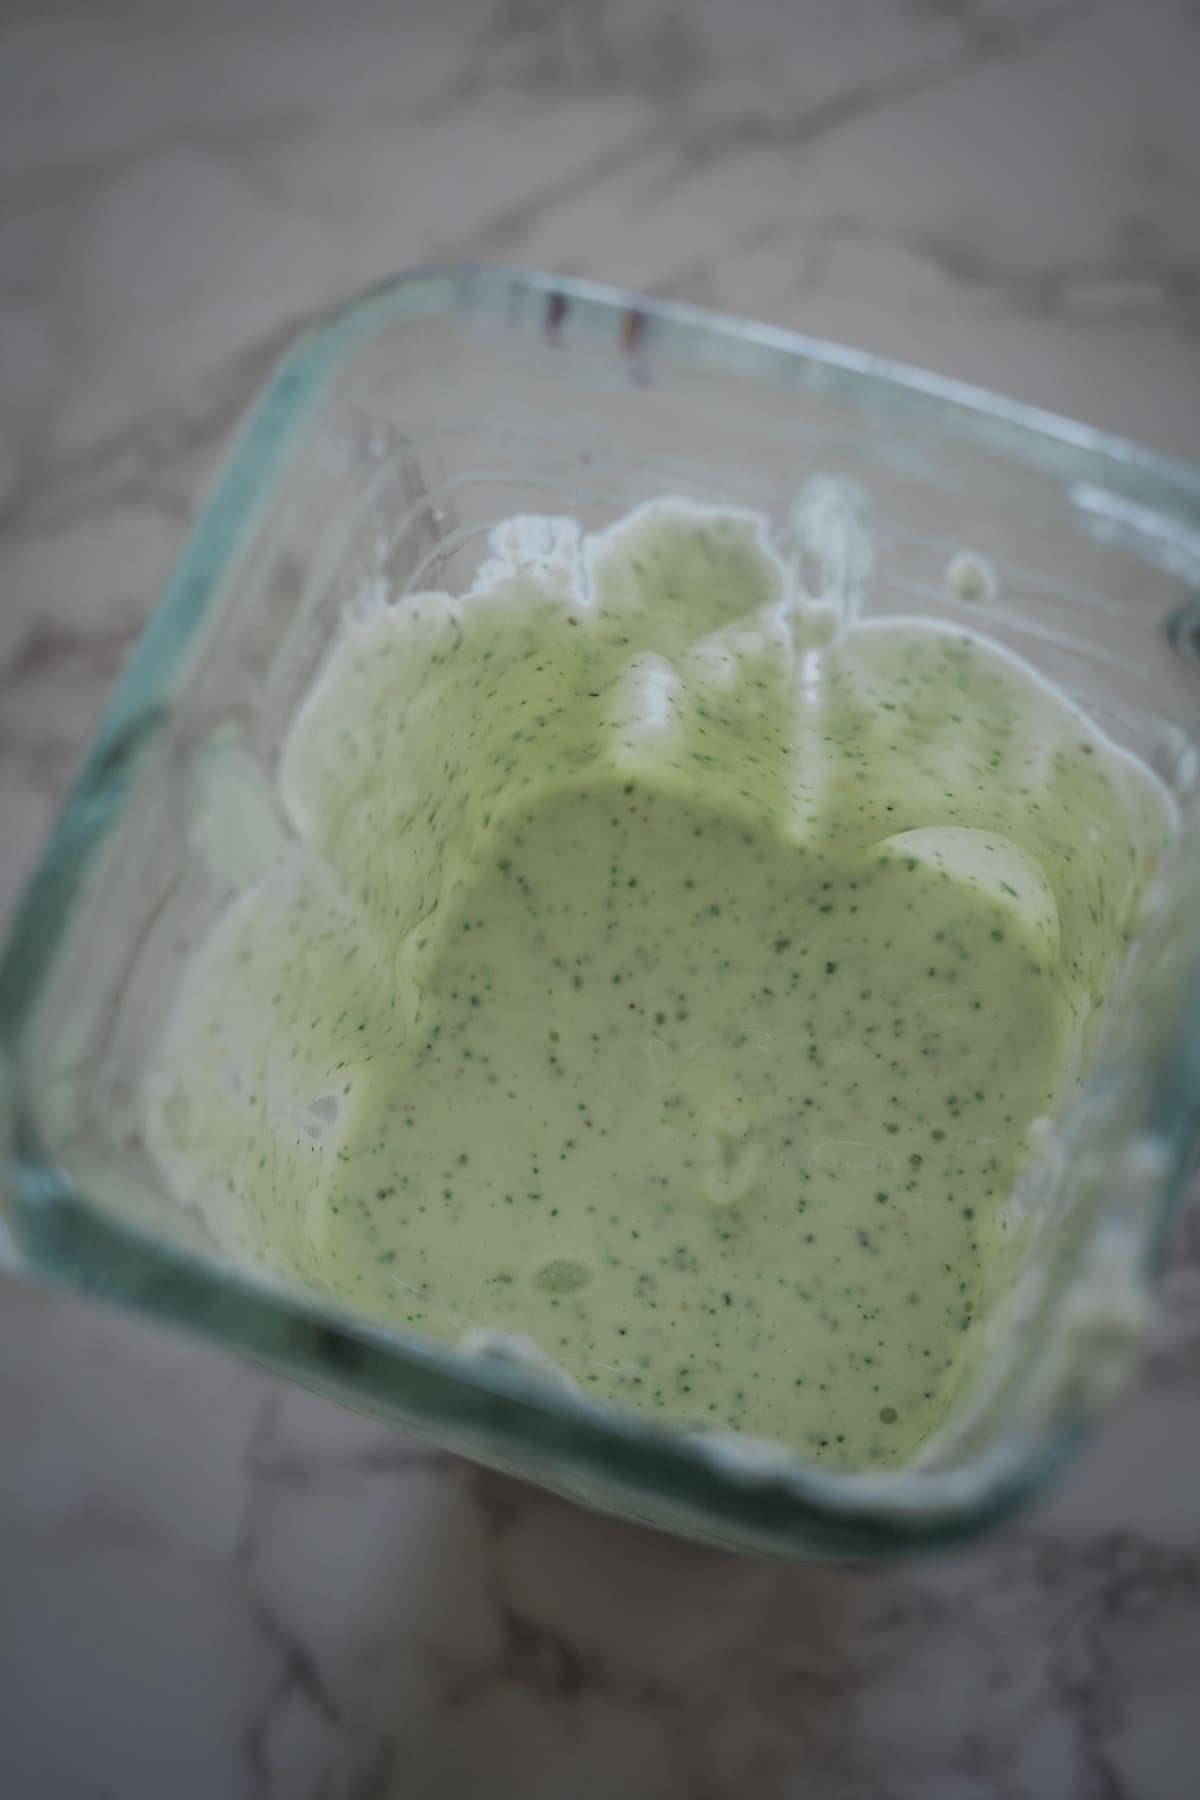 A glass container with a creamy green sauce or dip, speckled with small herb bits, on a marble surface.